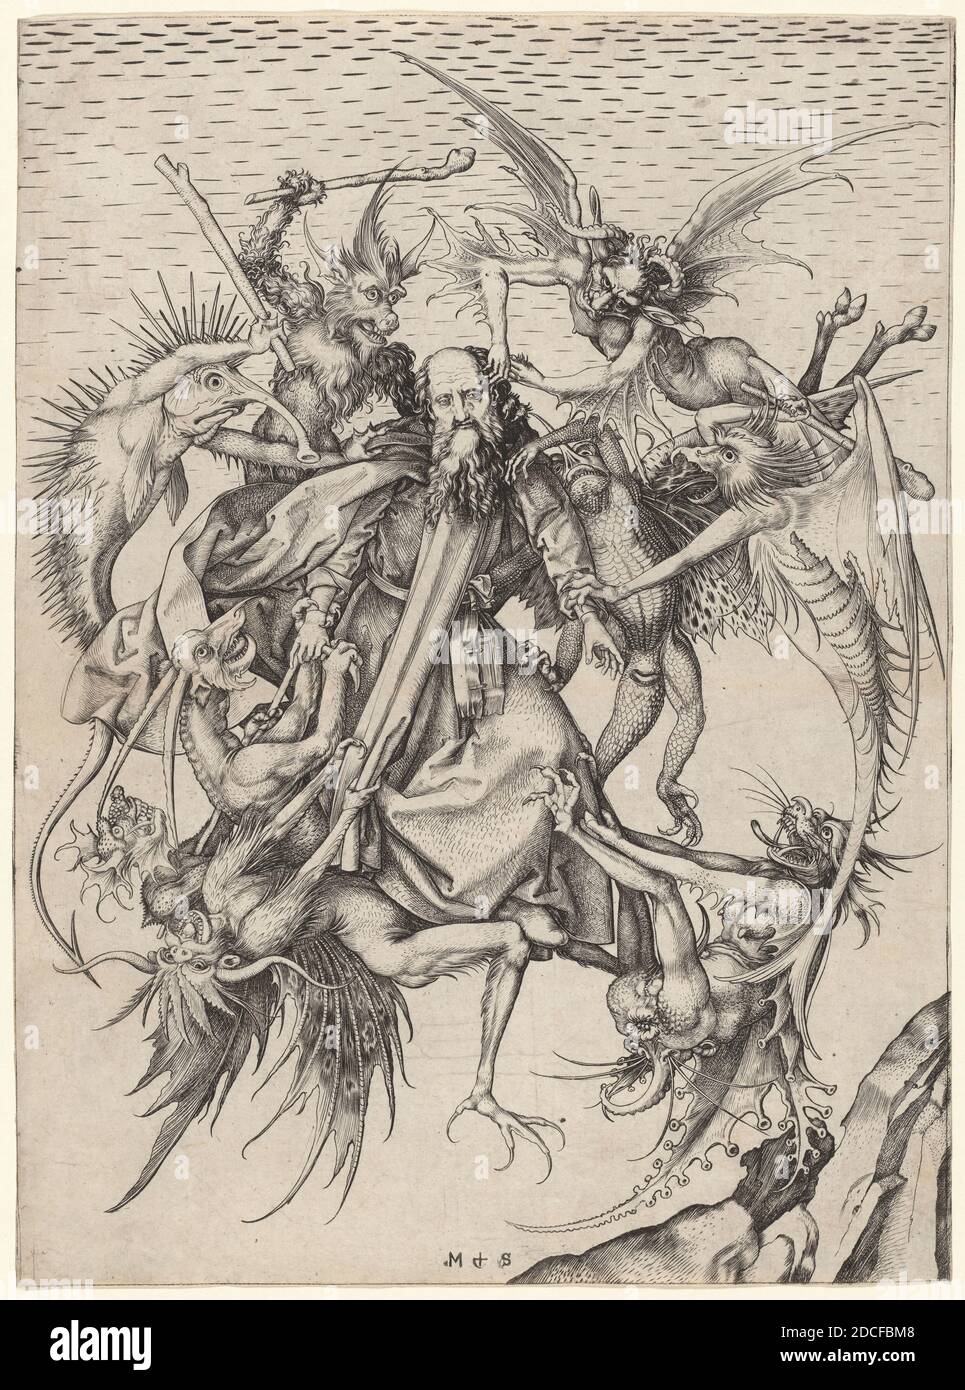 Martin Schongauer, (artist), German, c. 1450 - 1491, The Tribulations of Saint Anthony, c. 1470/1475, engraving on laid paper, sheet (trimmed to plate mark): 31.5 x 23.2 cm (12 3/8 x 9 1/8 in Stock Photo